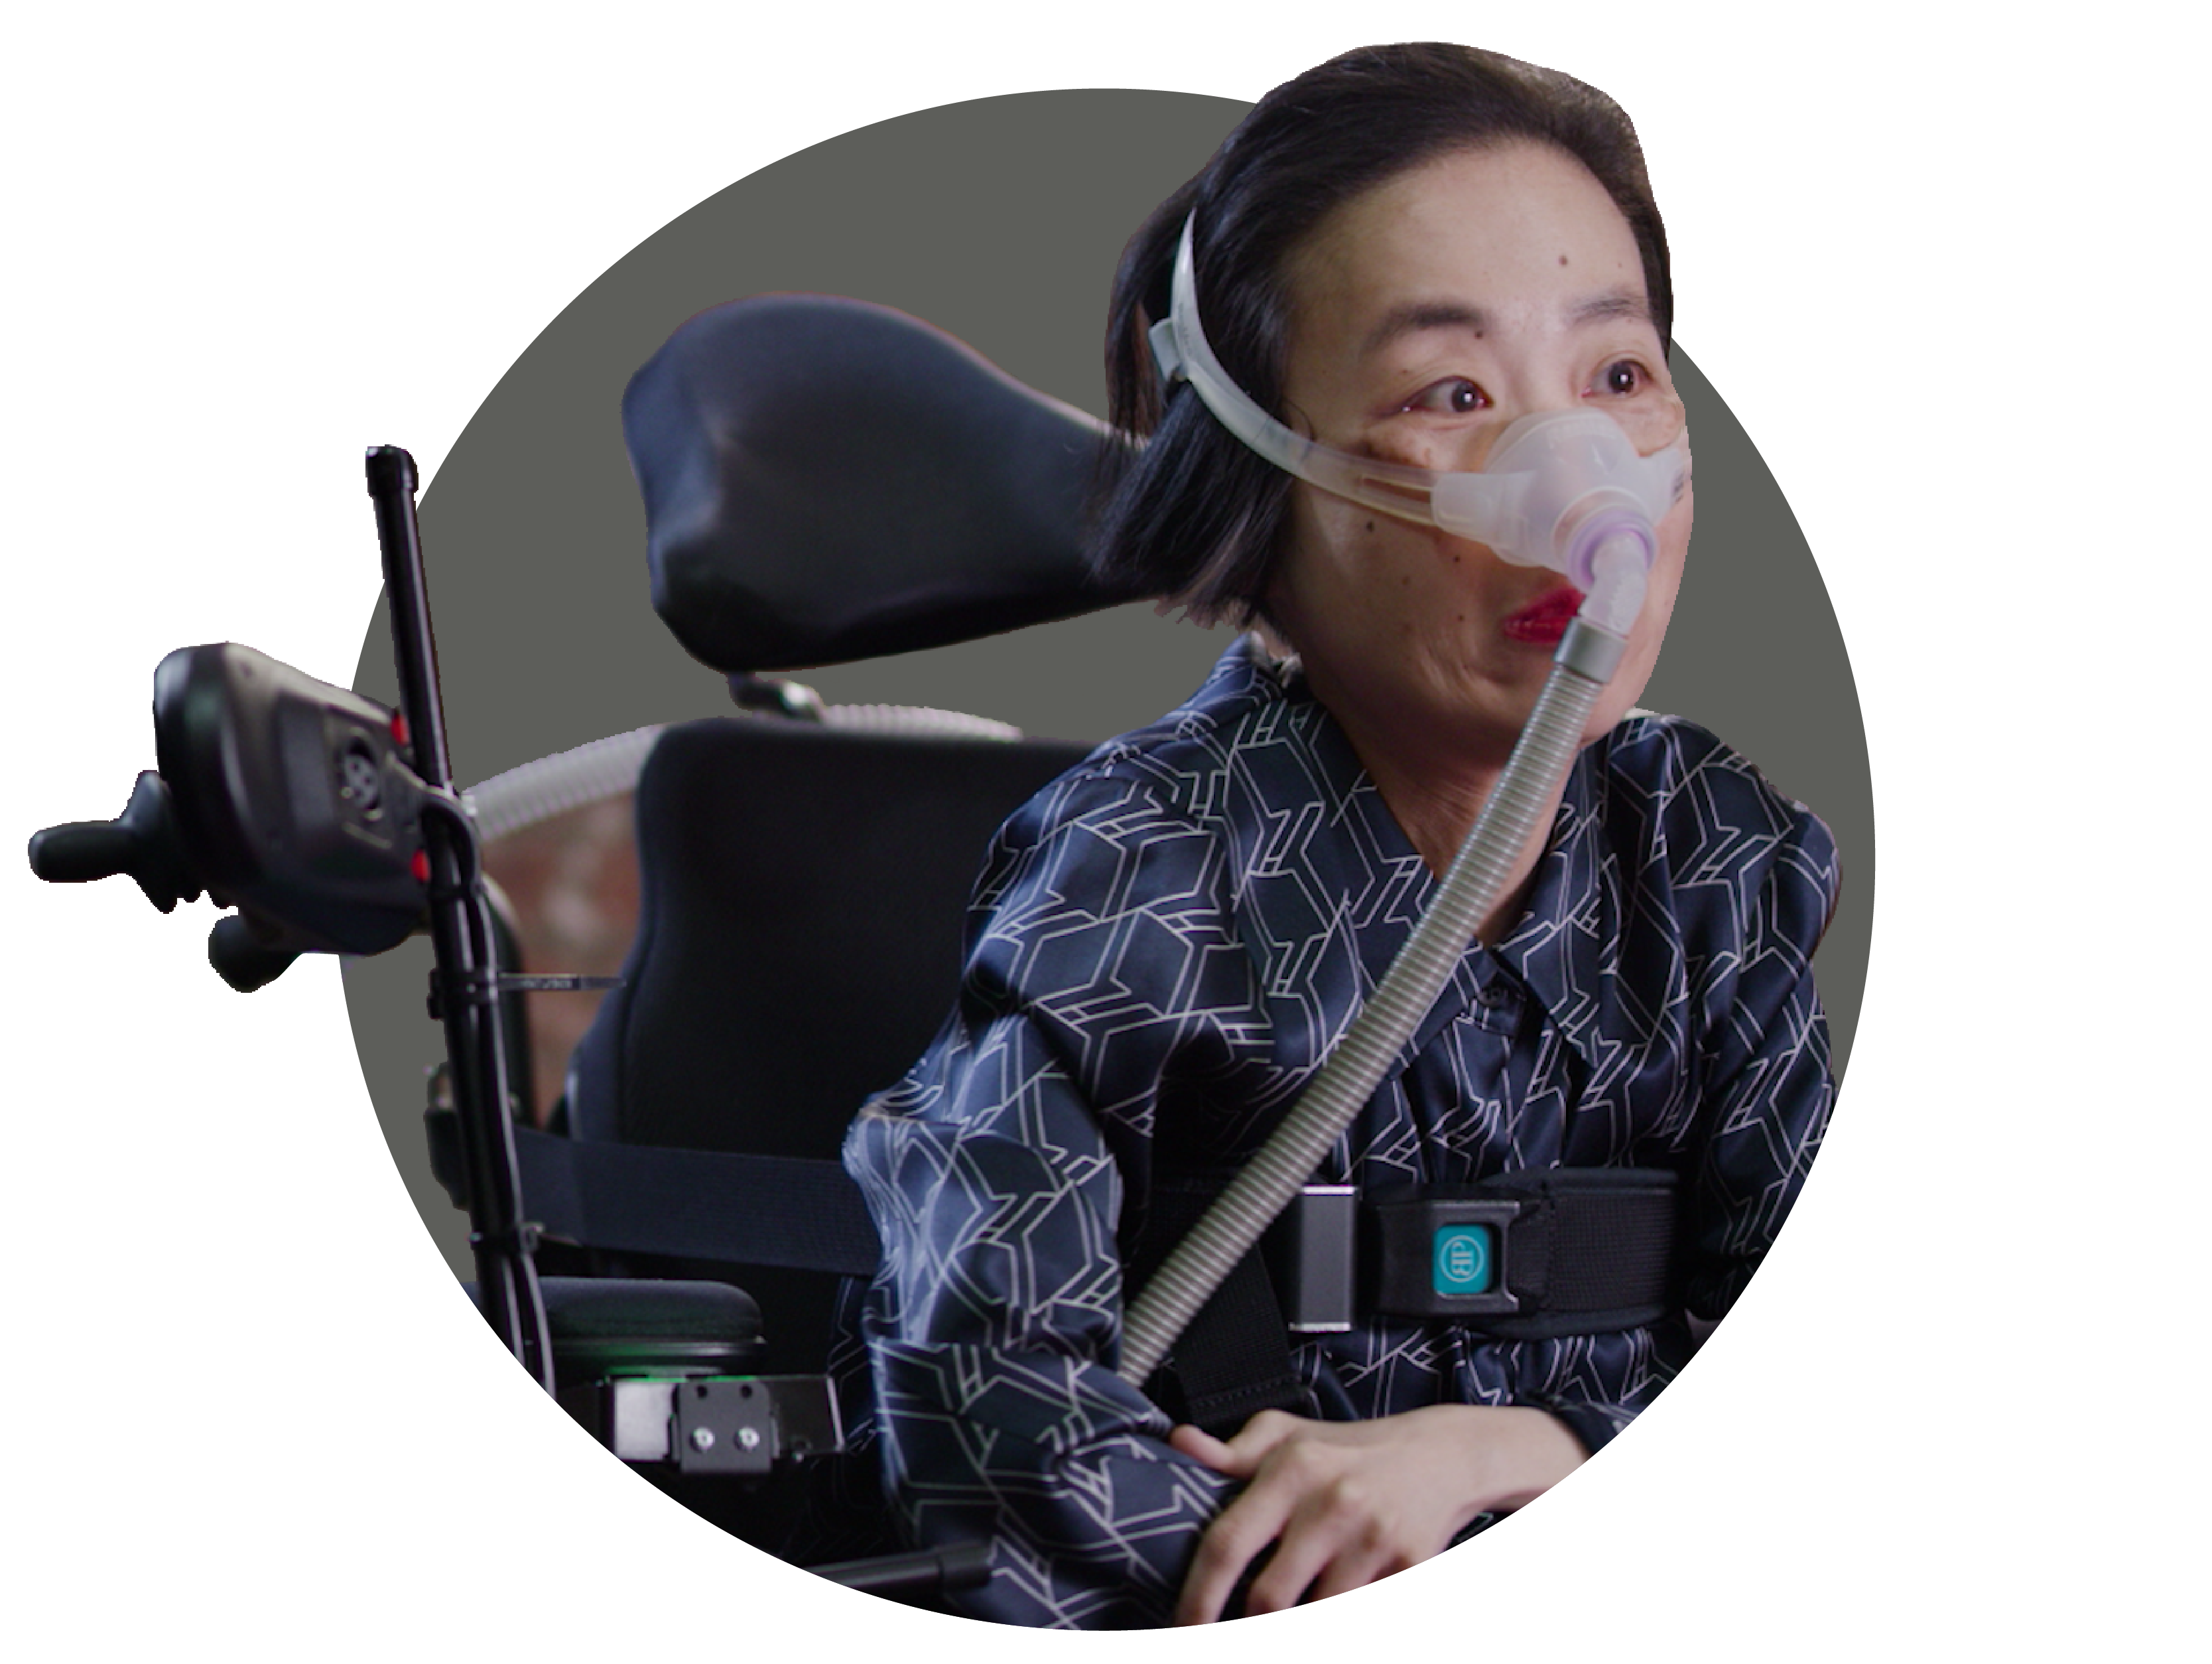 Alice Wong, an Asian American woman in a wheelchair wearing a mask over her nose attached to a tube for a BiPAP machine that helps her breathe. She is wearing a navy striped shirt and dark pants.